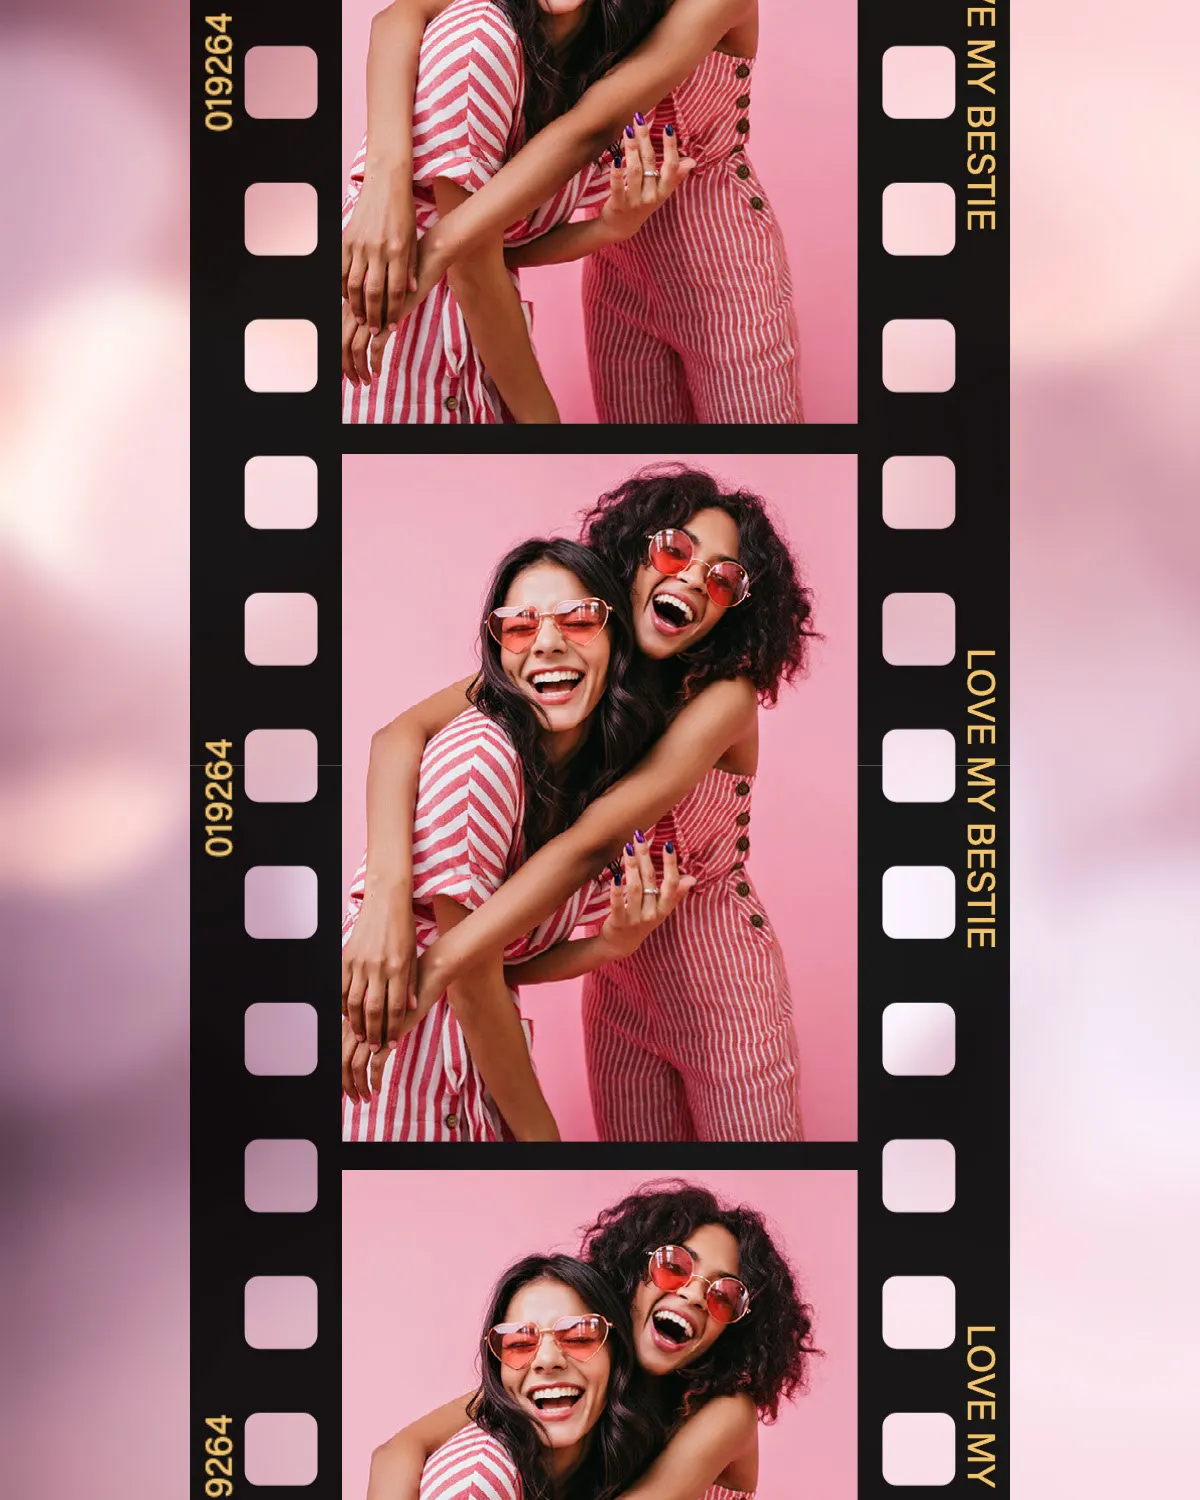 Pink Red Friends Best Friends Photo Booth Frame Collage Happy Cute Instagram Portrait Post